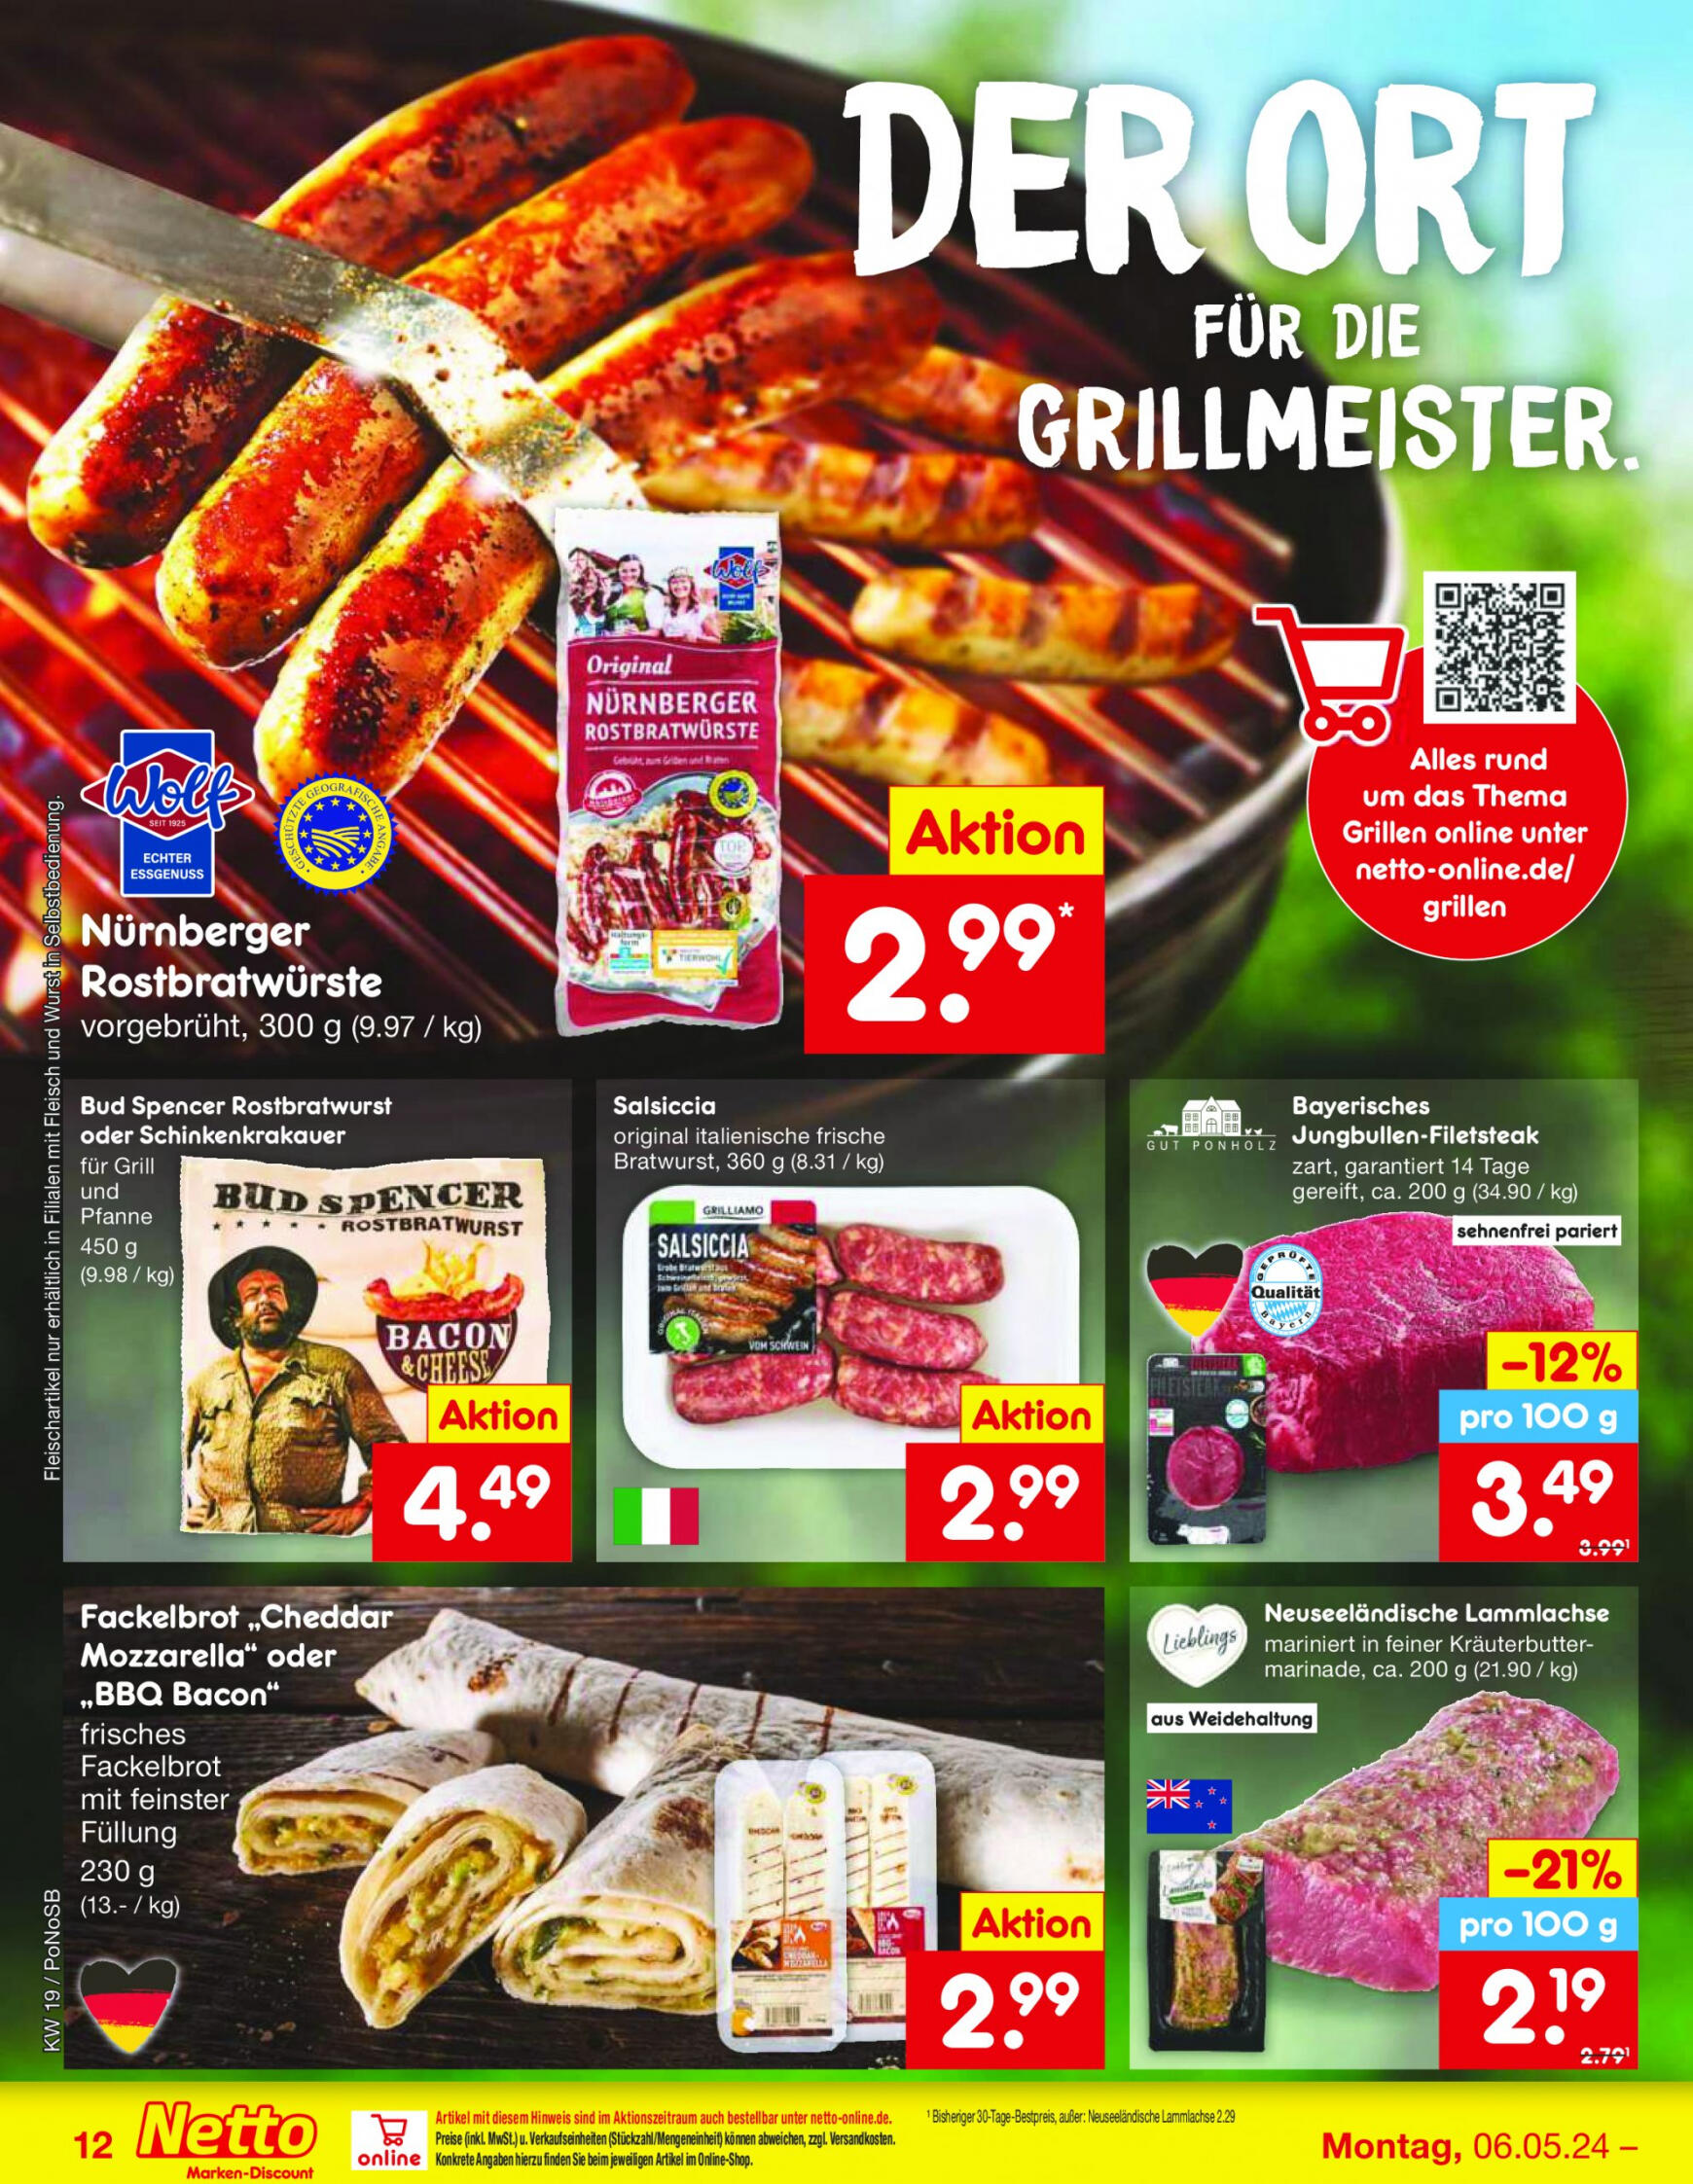 netto - Flyer Netto aktuell 06.05. - 11.05. - page: 12